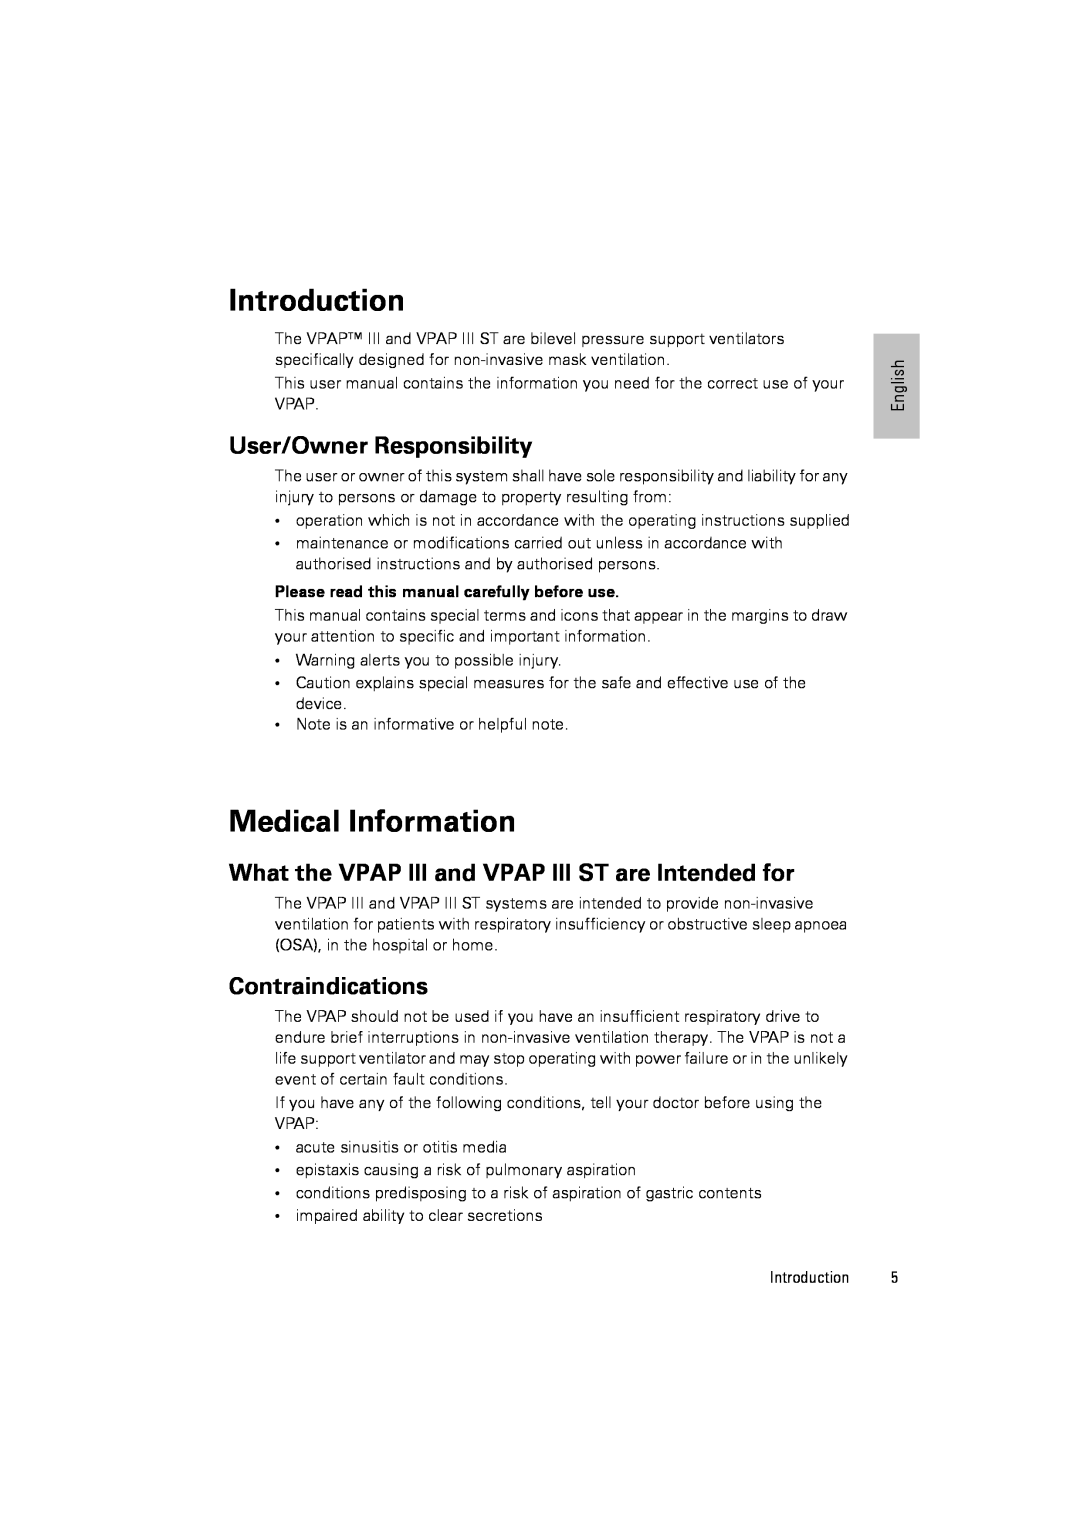 ResMed III & III ST user manual Introduction, Medical Information, User/Owner Responsibility, Contraindications 